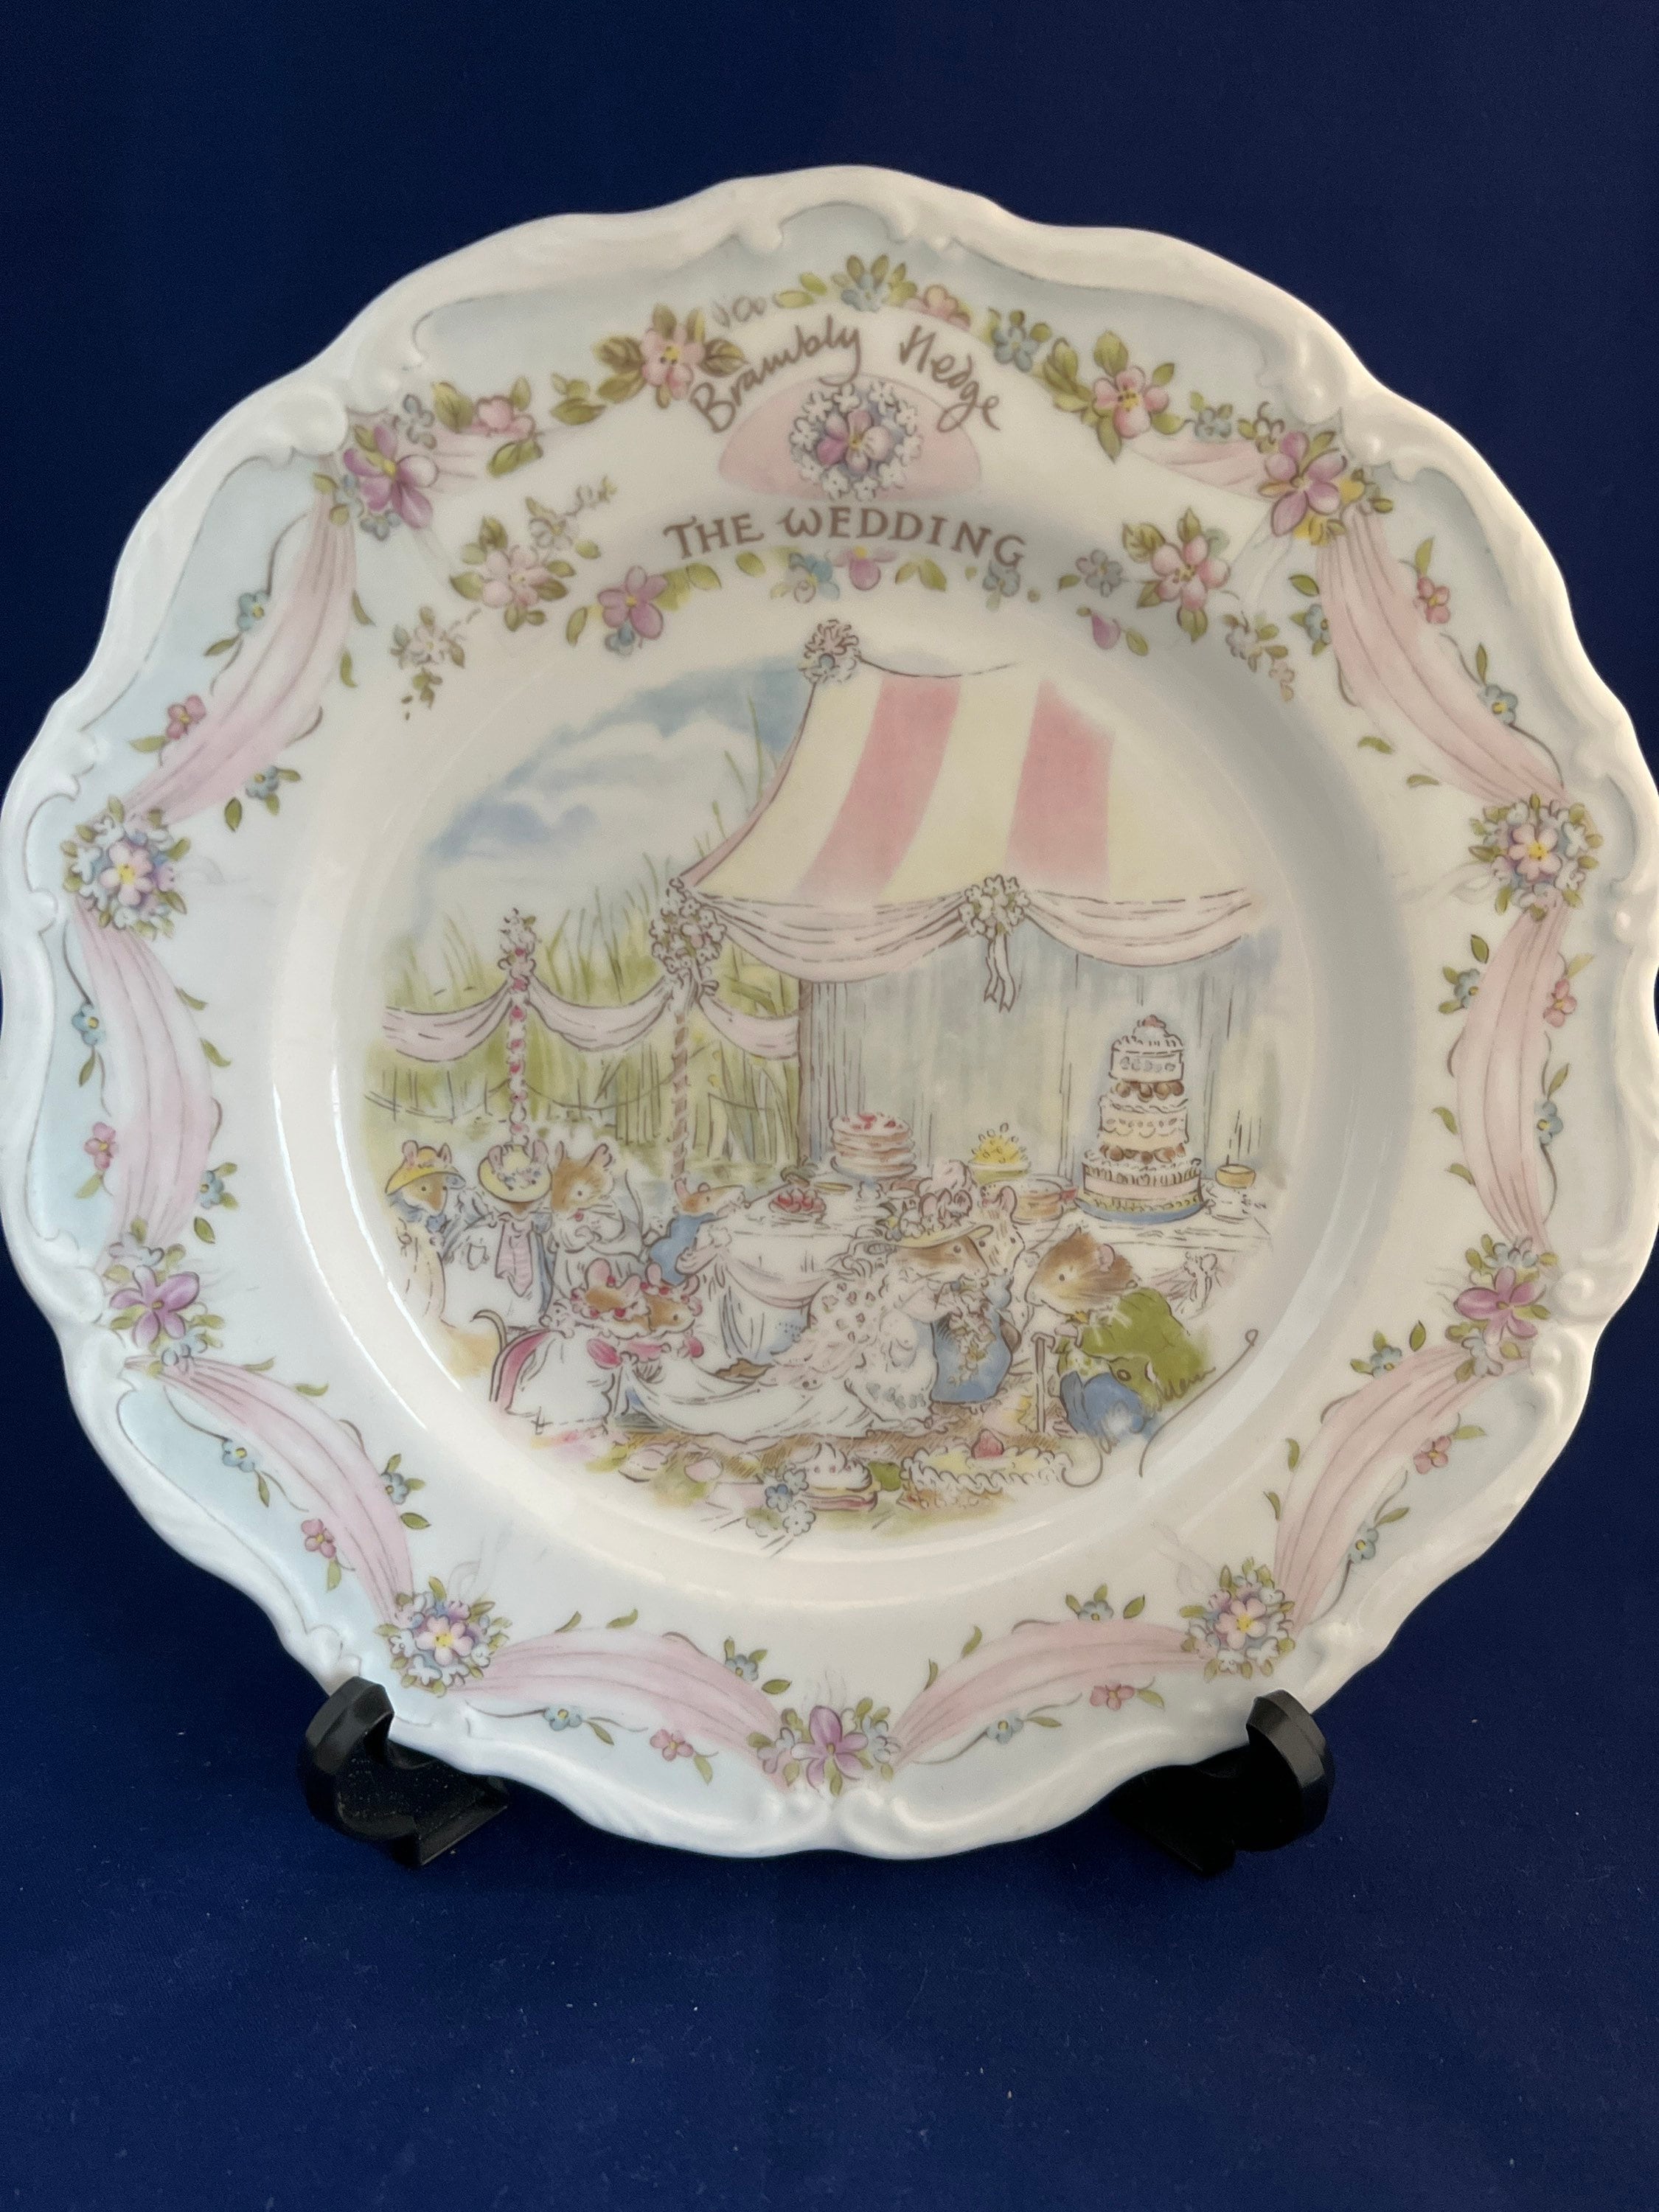 Royal Doulton, Brambly Hedge, the Wedding Plate, 21cm -  Canada